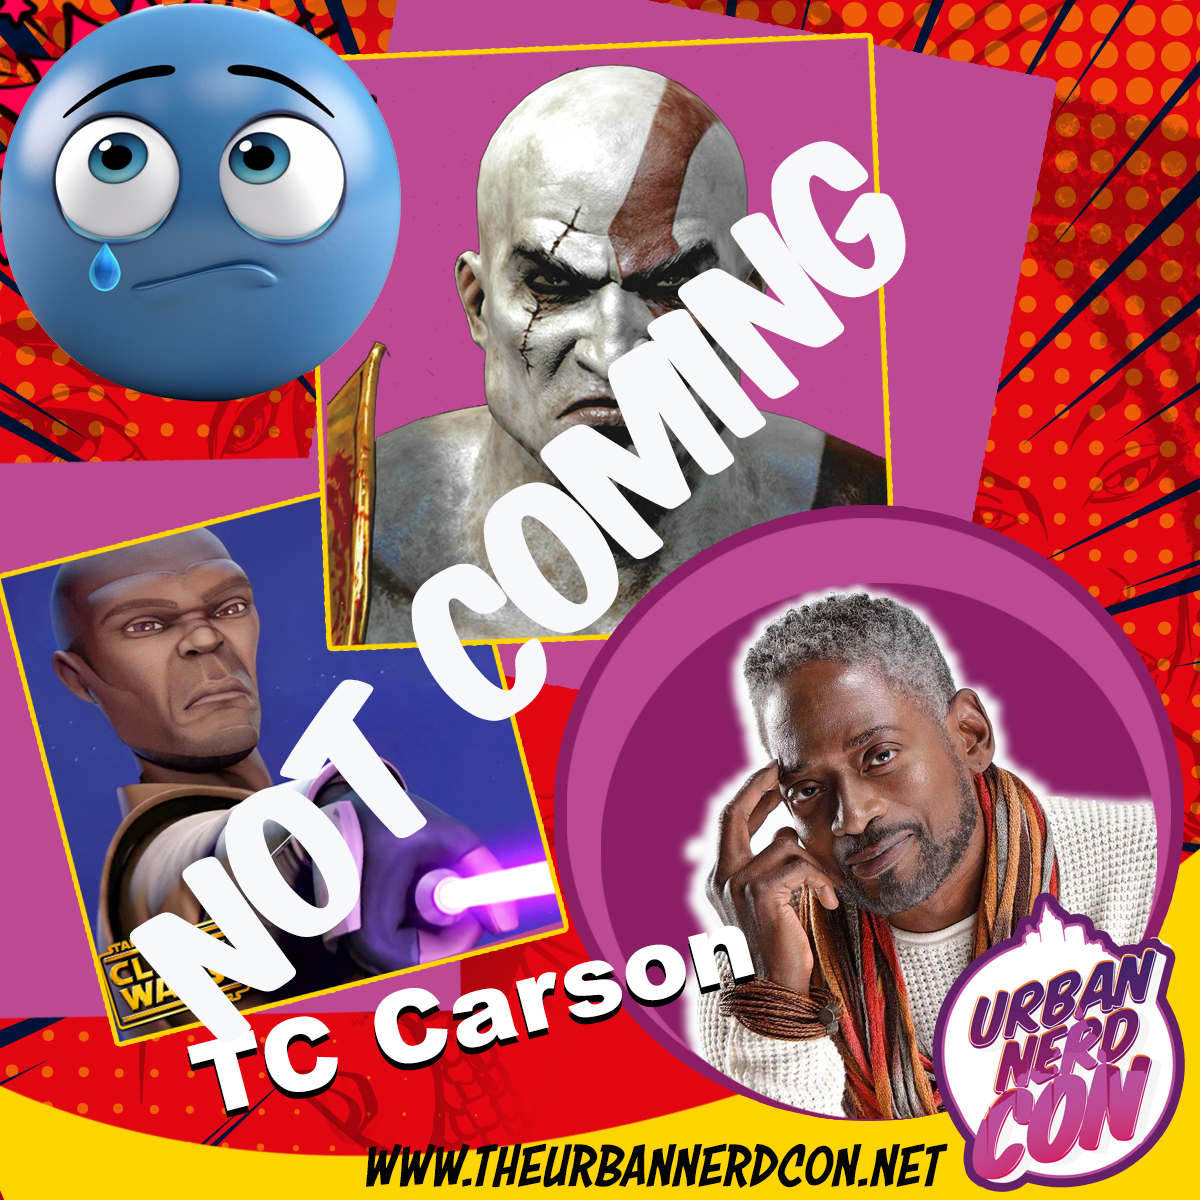 GUEST ANNOUNCEMENT! Due to delays associated with the venue change TC Carson will not be attending. I apologize to those who were expecting to see him, this situation is on me. We still look forward to seeing you all with our other guests & 70 amazing vendors! Roy M. Eavins II